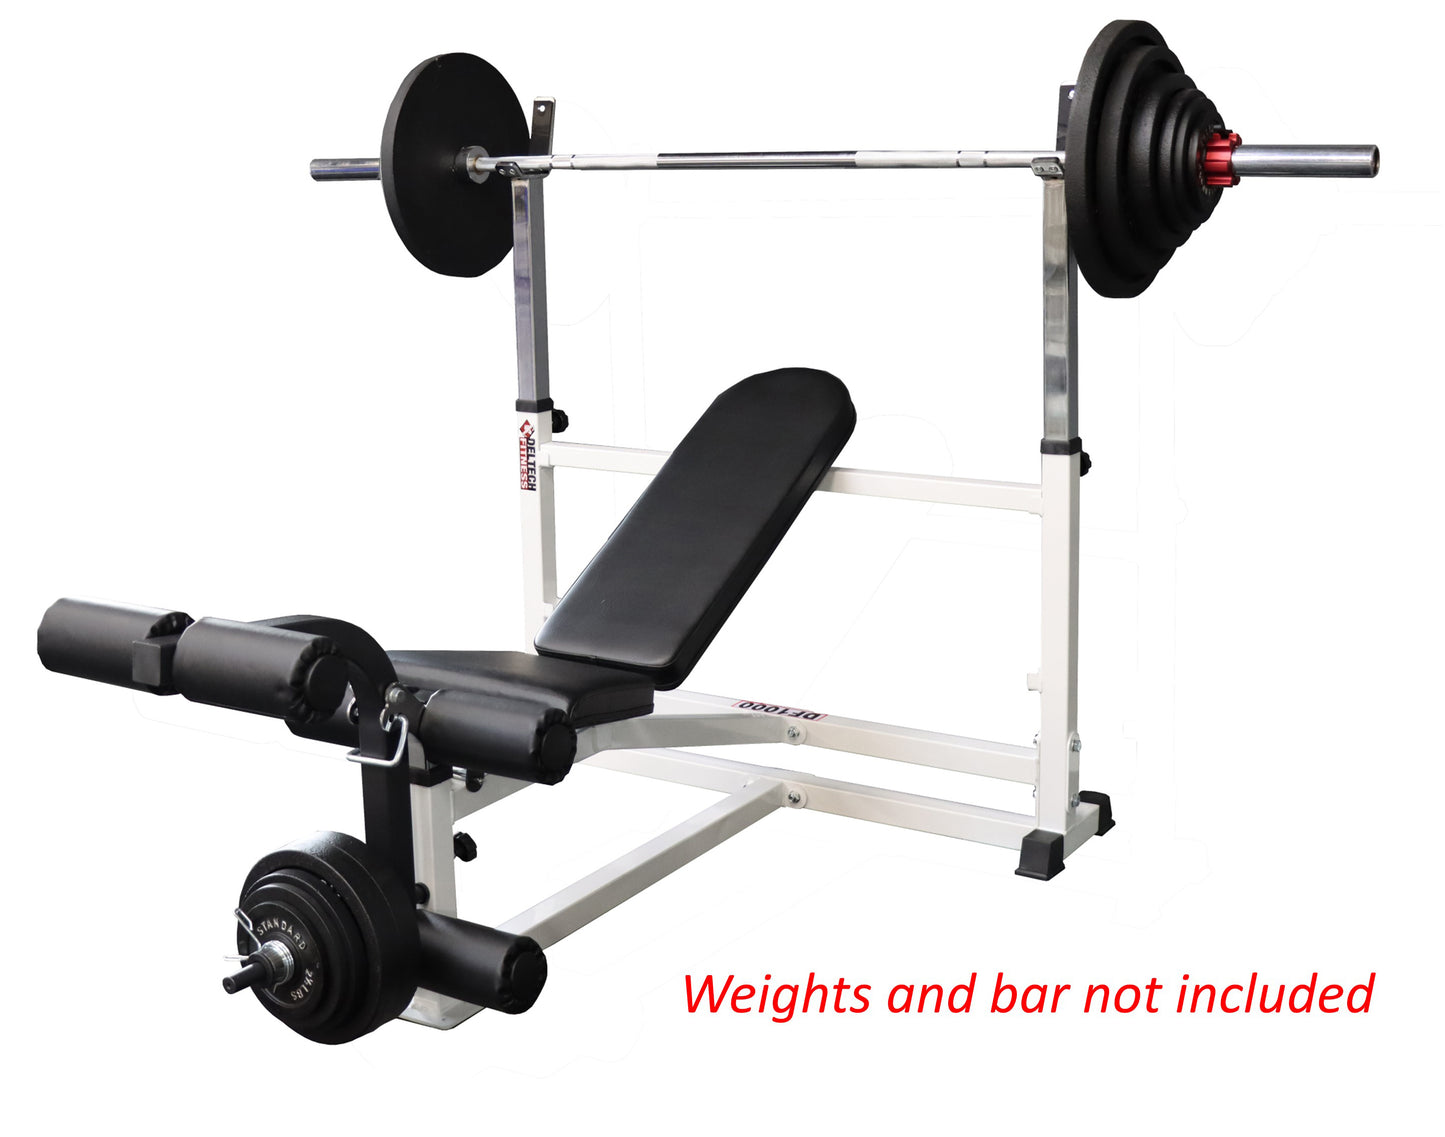 Deltech Fitness Olympic Weight Bench (DF1000)